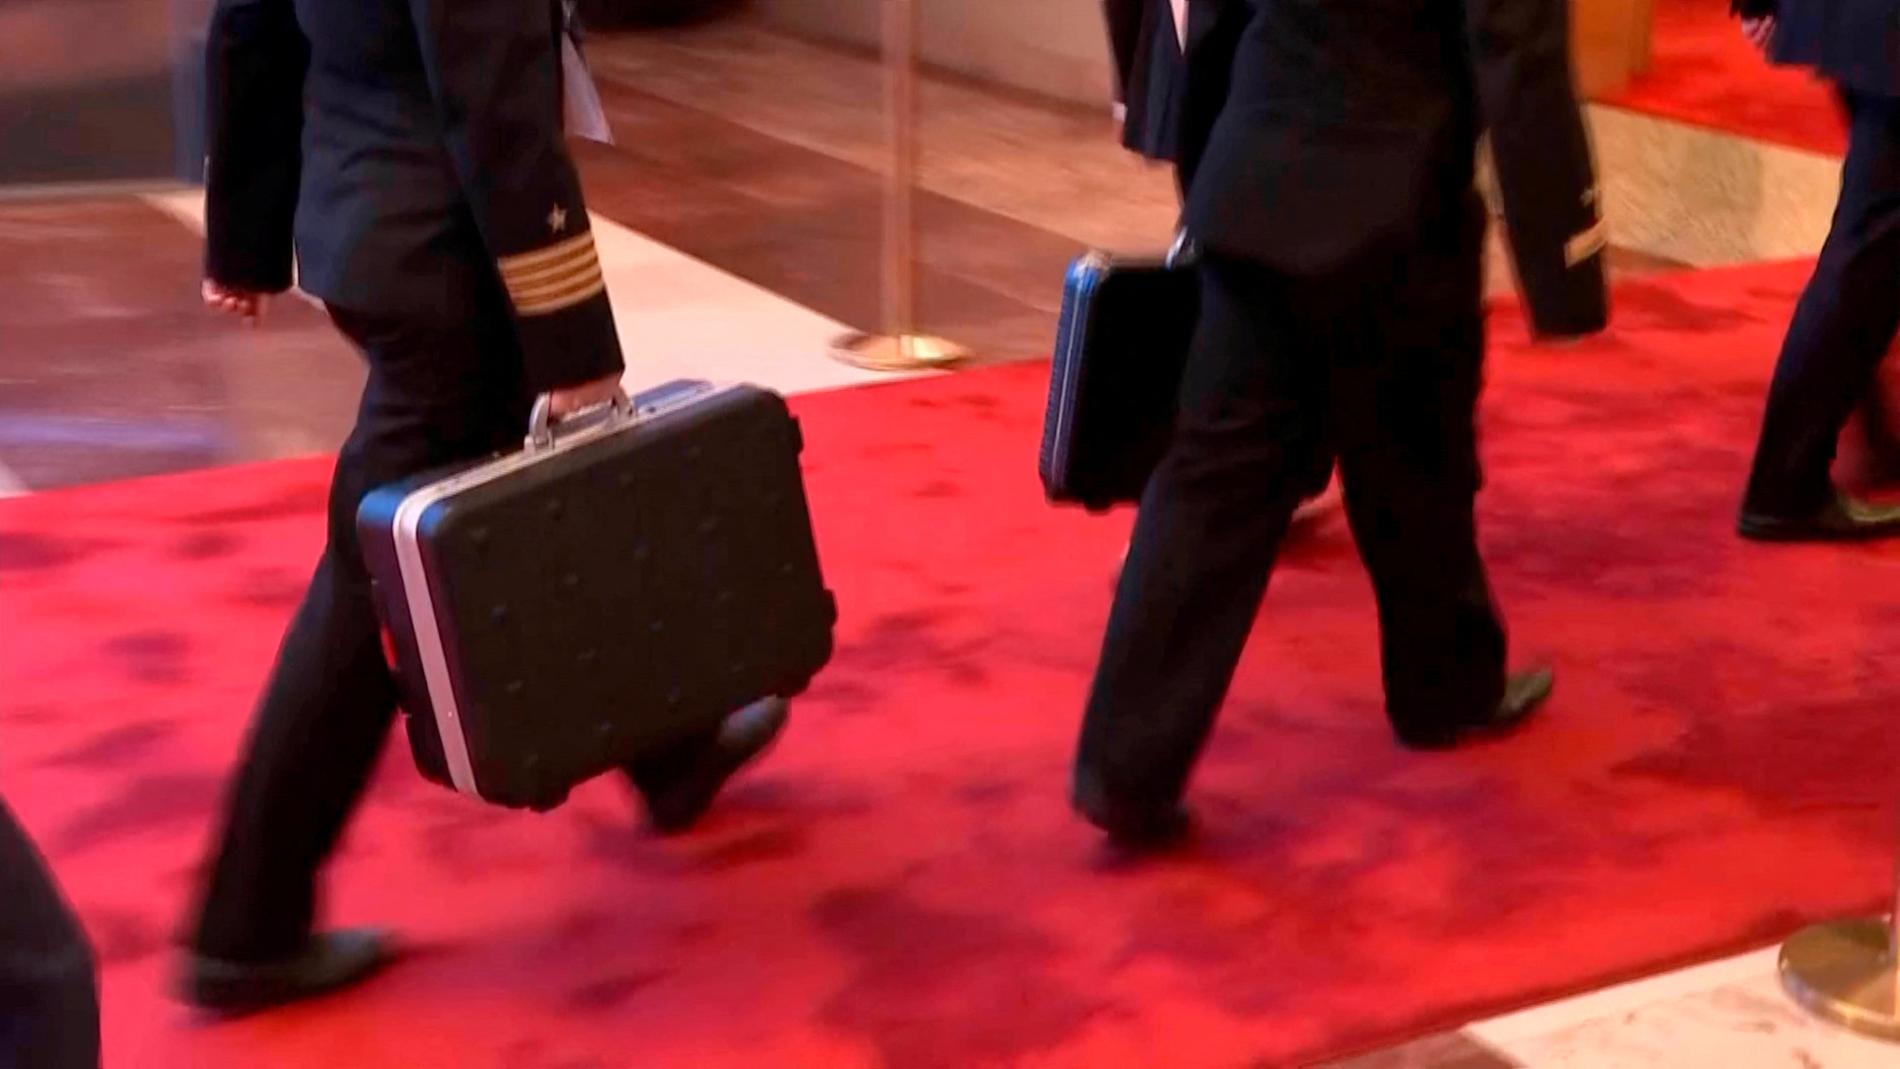 A close-up of the nuclear suitcases brought to Beijing by the Kremlin.